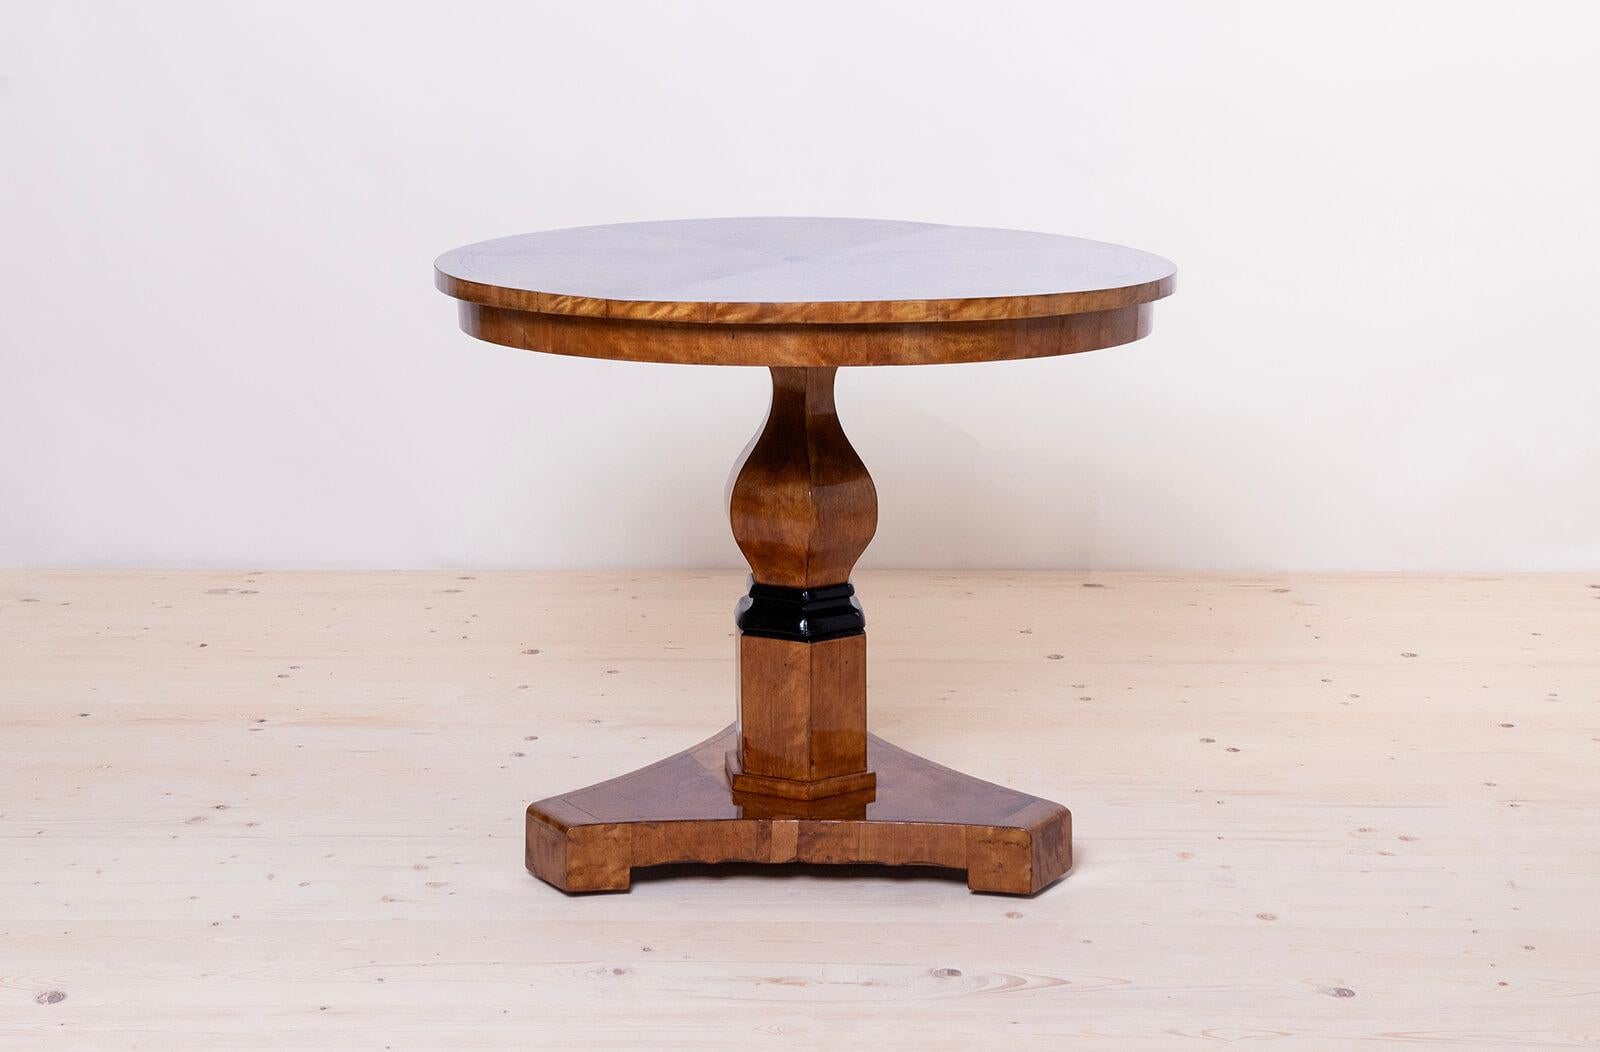 This Biedermeier round table was made in Germany around 1830. It is supported on a beautifully sculpted leg with ebonized detail. The piece is veneered with beautiful flame birch. It is after professional renovation process. Surface was finished